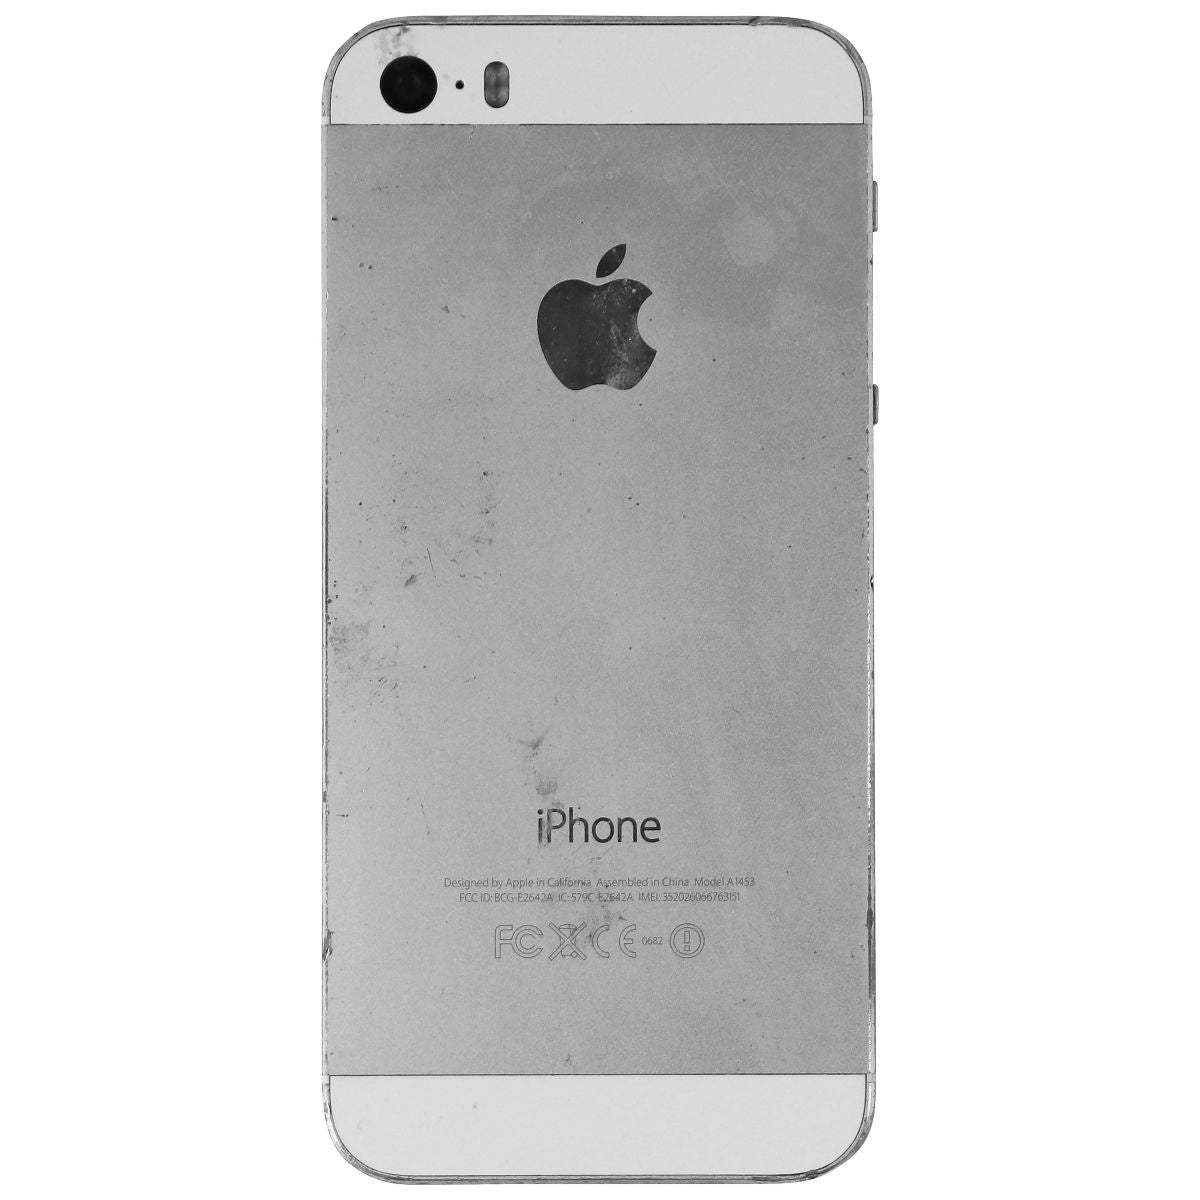 Apple iPhone 5s (4.0-inch) Smartphone (A1453) T-Mobile + AT&T - 32GB / Silver Cell Phones & Smartphones Apple    - Simple Cell Bulk Wholesale Pricing - USA Seller